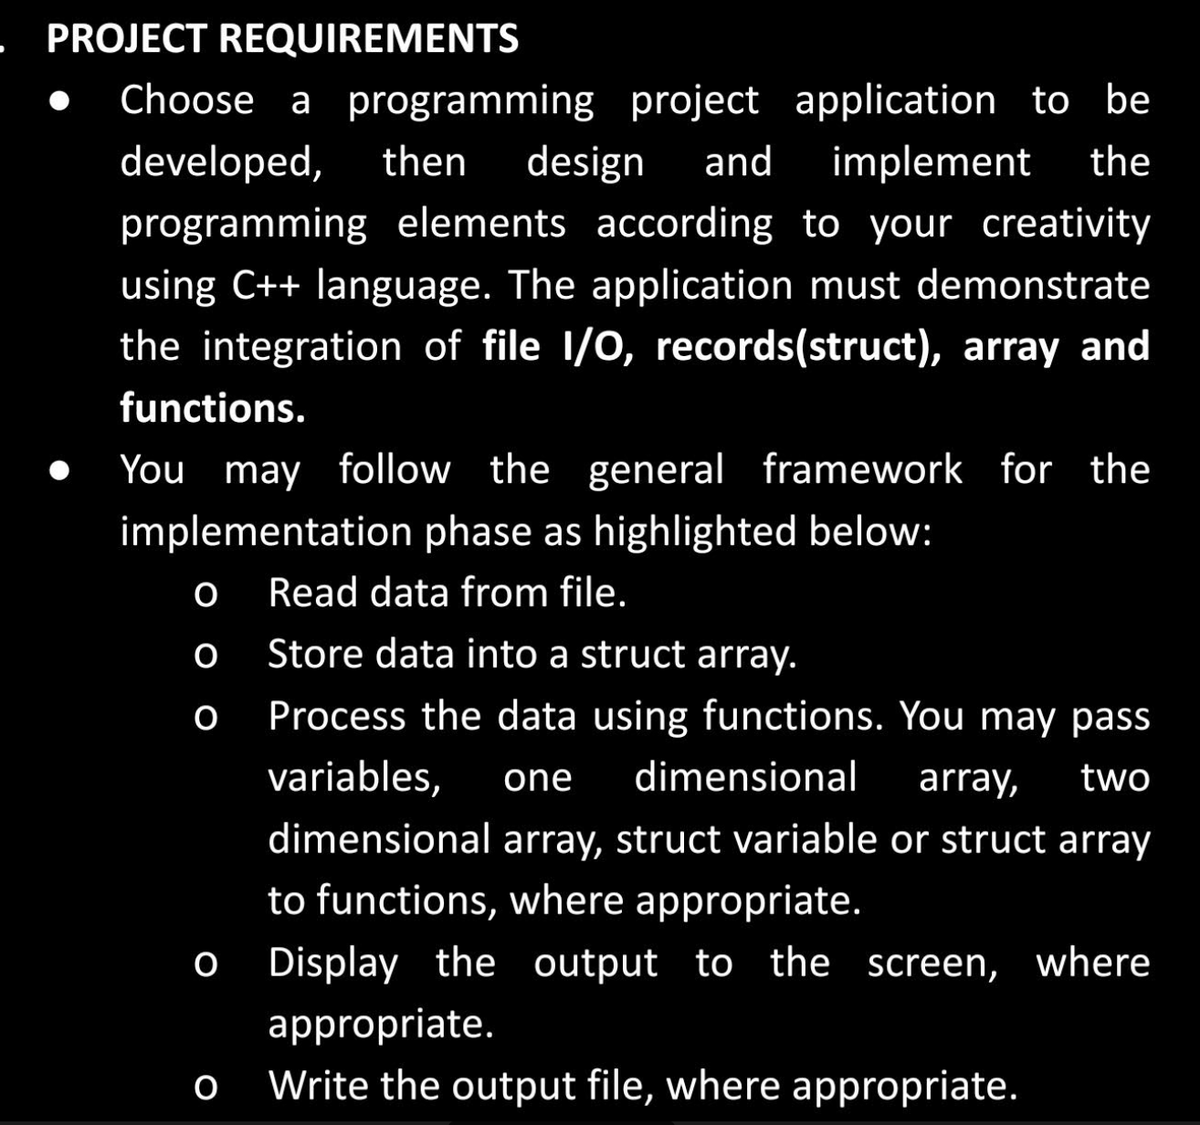 - PROJECT REQUIREMENTS
Choose a programming project application to be
developed, then design and implement the
programming elements according to your creativity
using C++ language. The application must demonstrate
the integration of file I/O, records(struct), array and
functions.
You may follow the general framework for the
implementation phase as highlighted below:
Read data from file.
Store data into a struct array.
Process the data using functions. You may pass
variables, one dimensional array, two
dimensional array, struct variable or struct array
to functions, where appropriate.
Display the output to the screen, where
appropriate.
Write the output file, where appropriate.
O
O
O
O
O